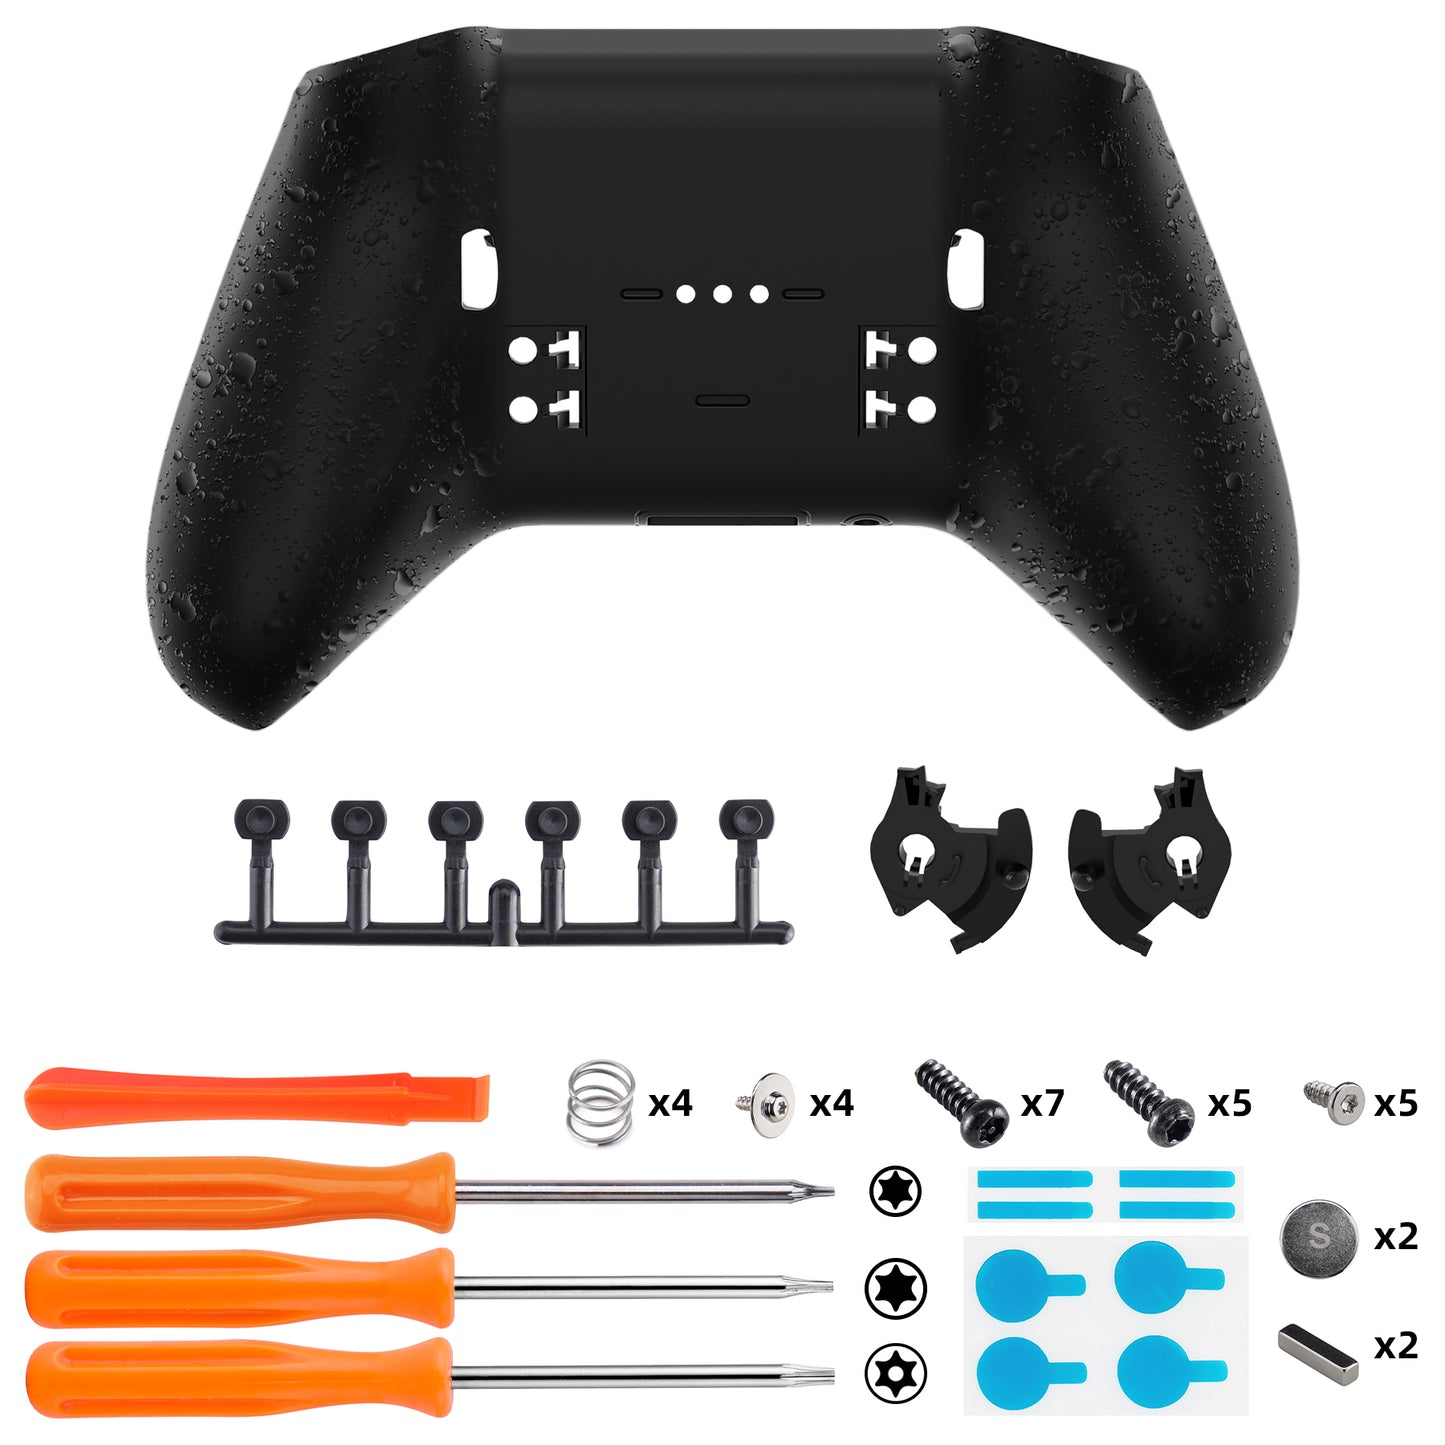 Replacement Bottom Shell Case for Xbox Elite Series 2 & Elite Series 2 Core Controller Model 1797 - Textured Black eXtremeRate